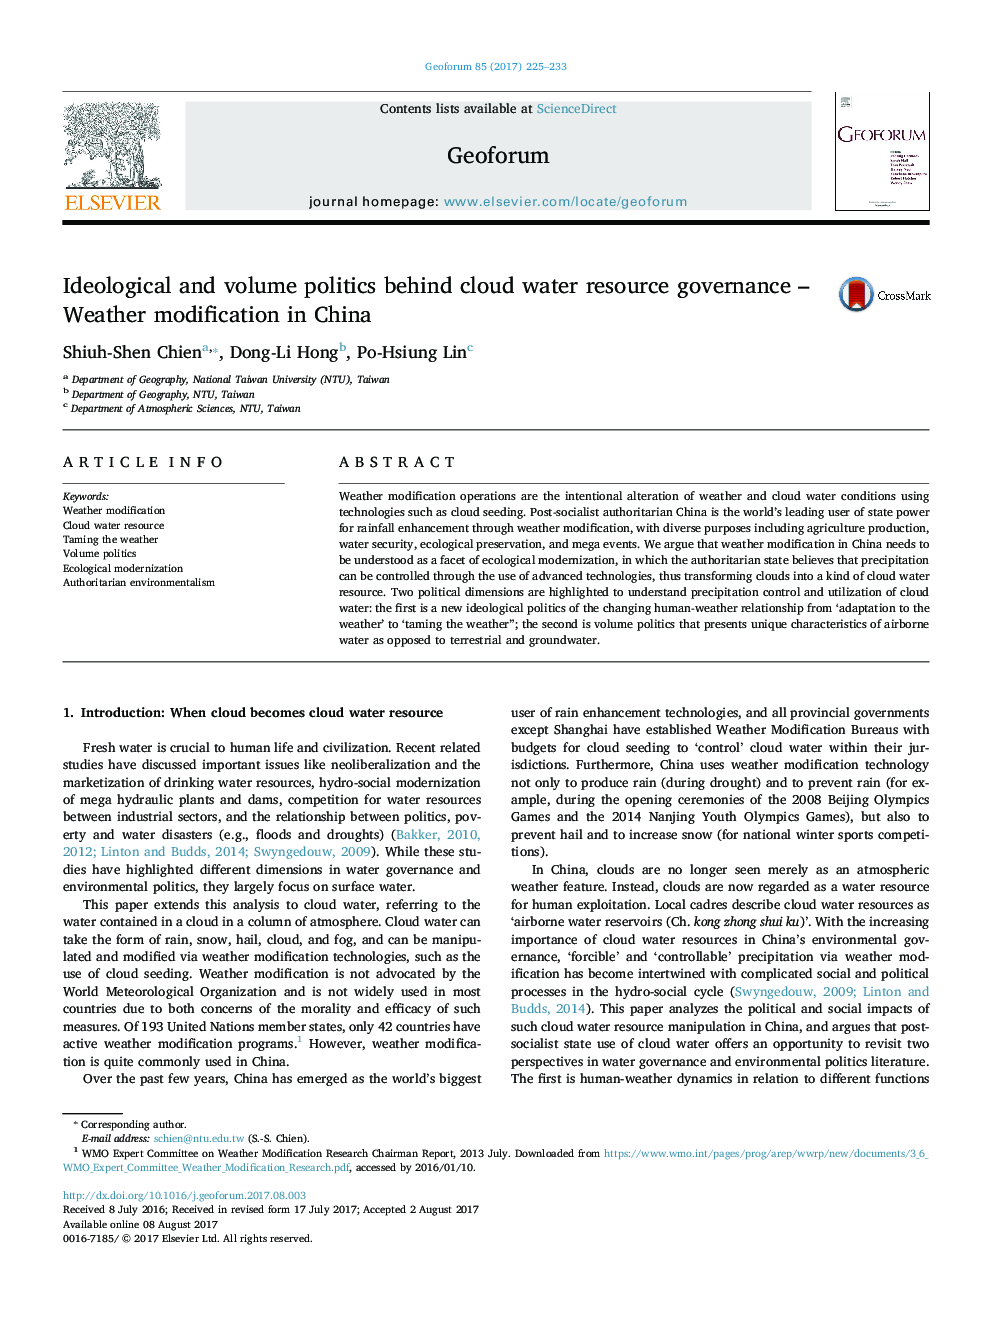 Ideological and volume politics behind cloud water resource governance - Weather modification in China